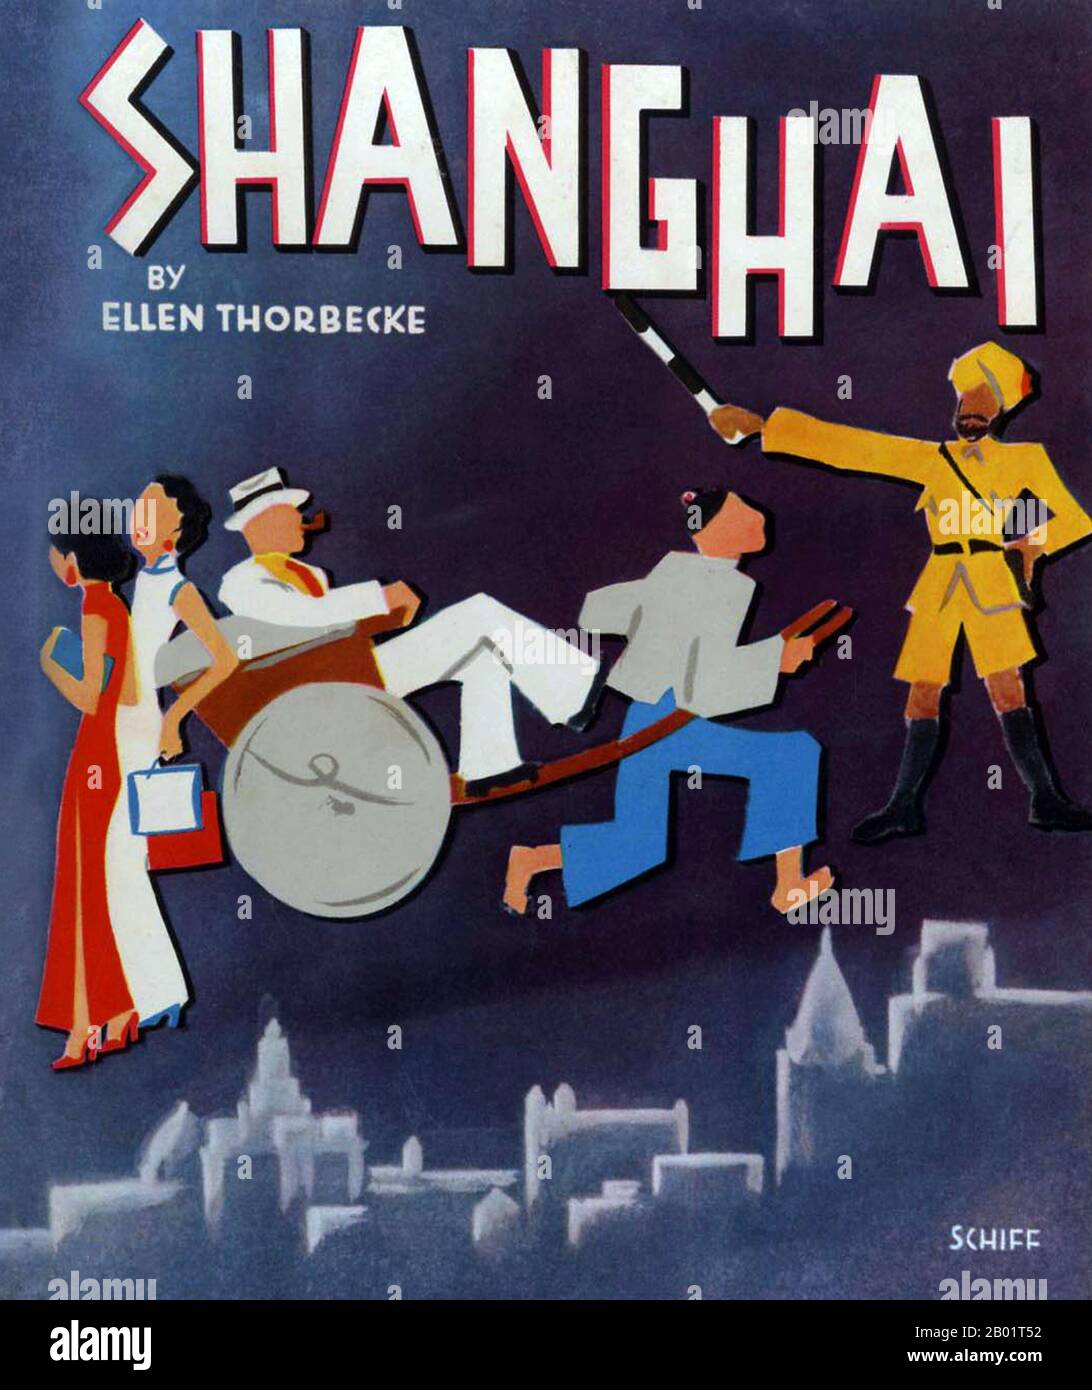 China: Front cover of 'Shanghai', by Ellen Thorbecke with sketches by Friedrich Schiff (Shanghai, 1940).  Book cover by the Austrian artist Friedrich Schiff, who lived in Shanghai during the 1930s and 1940s. His images exemplify the 'anything goes' atmosphere and indulgence amidst poverty that characterised Old Shanghai and which would soon be brought to an abrupt end by Japanese invasion (1937) and Communist revolution (1949). Stock Photo